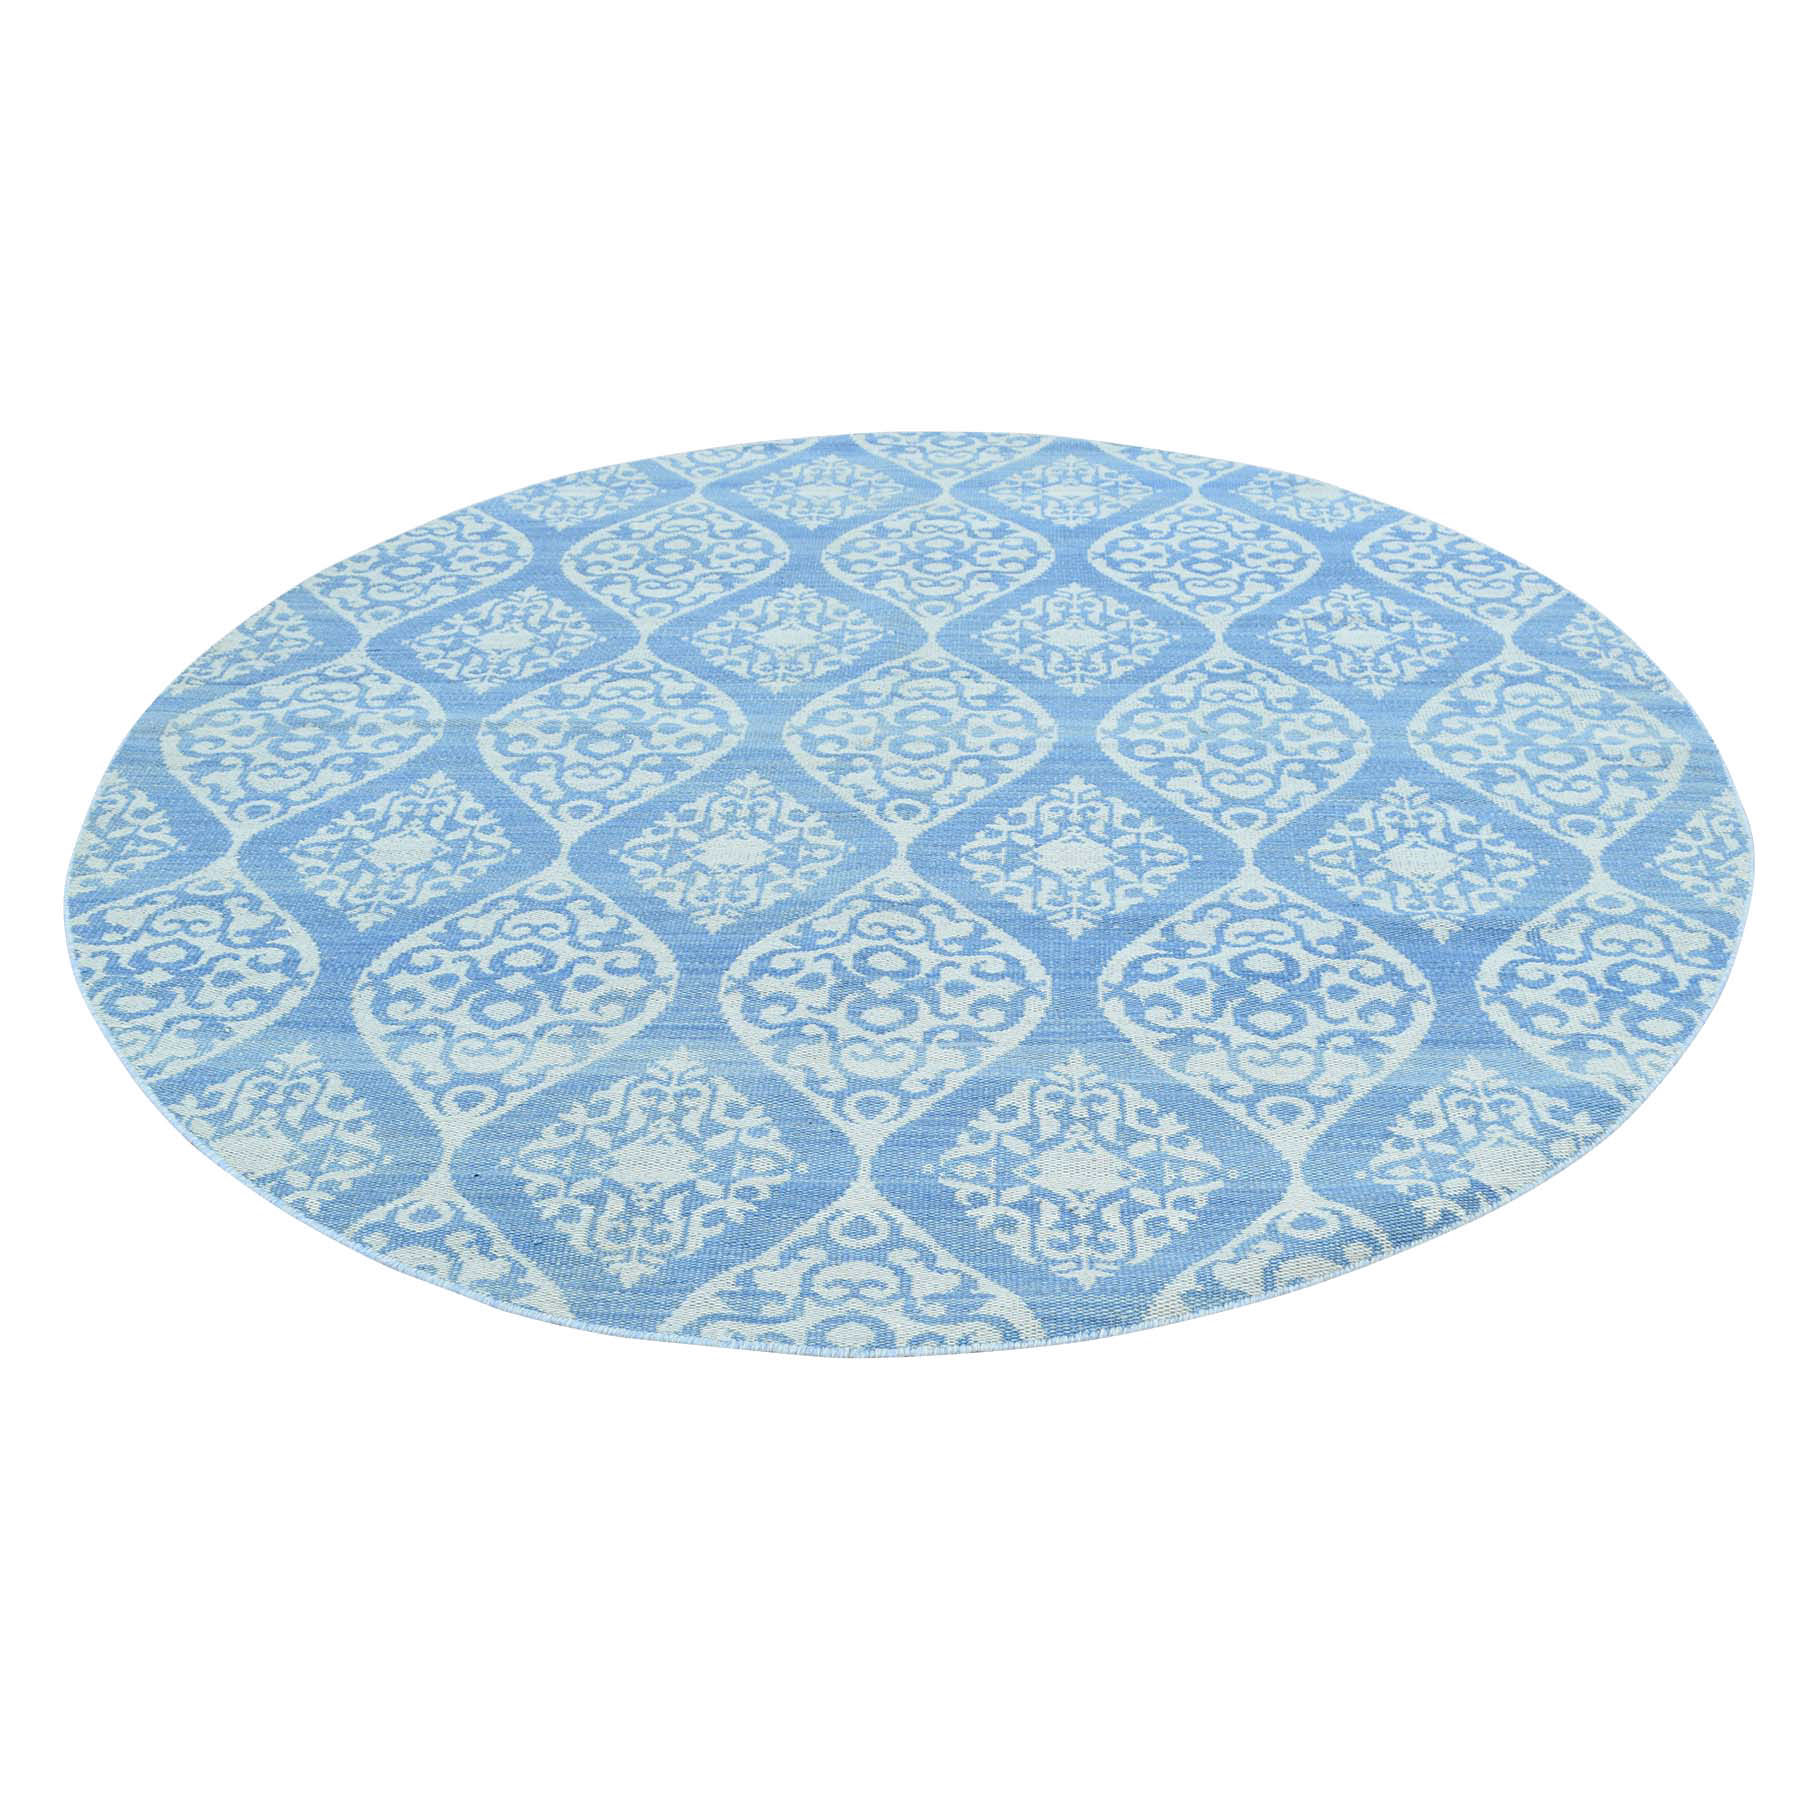 6'x6' Reversible Flat Weave Round Hand Woven Durie Kilim Rug 